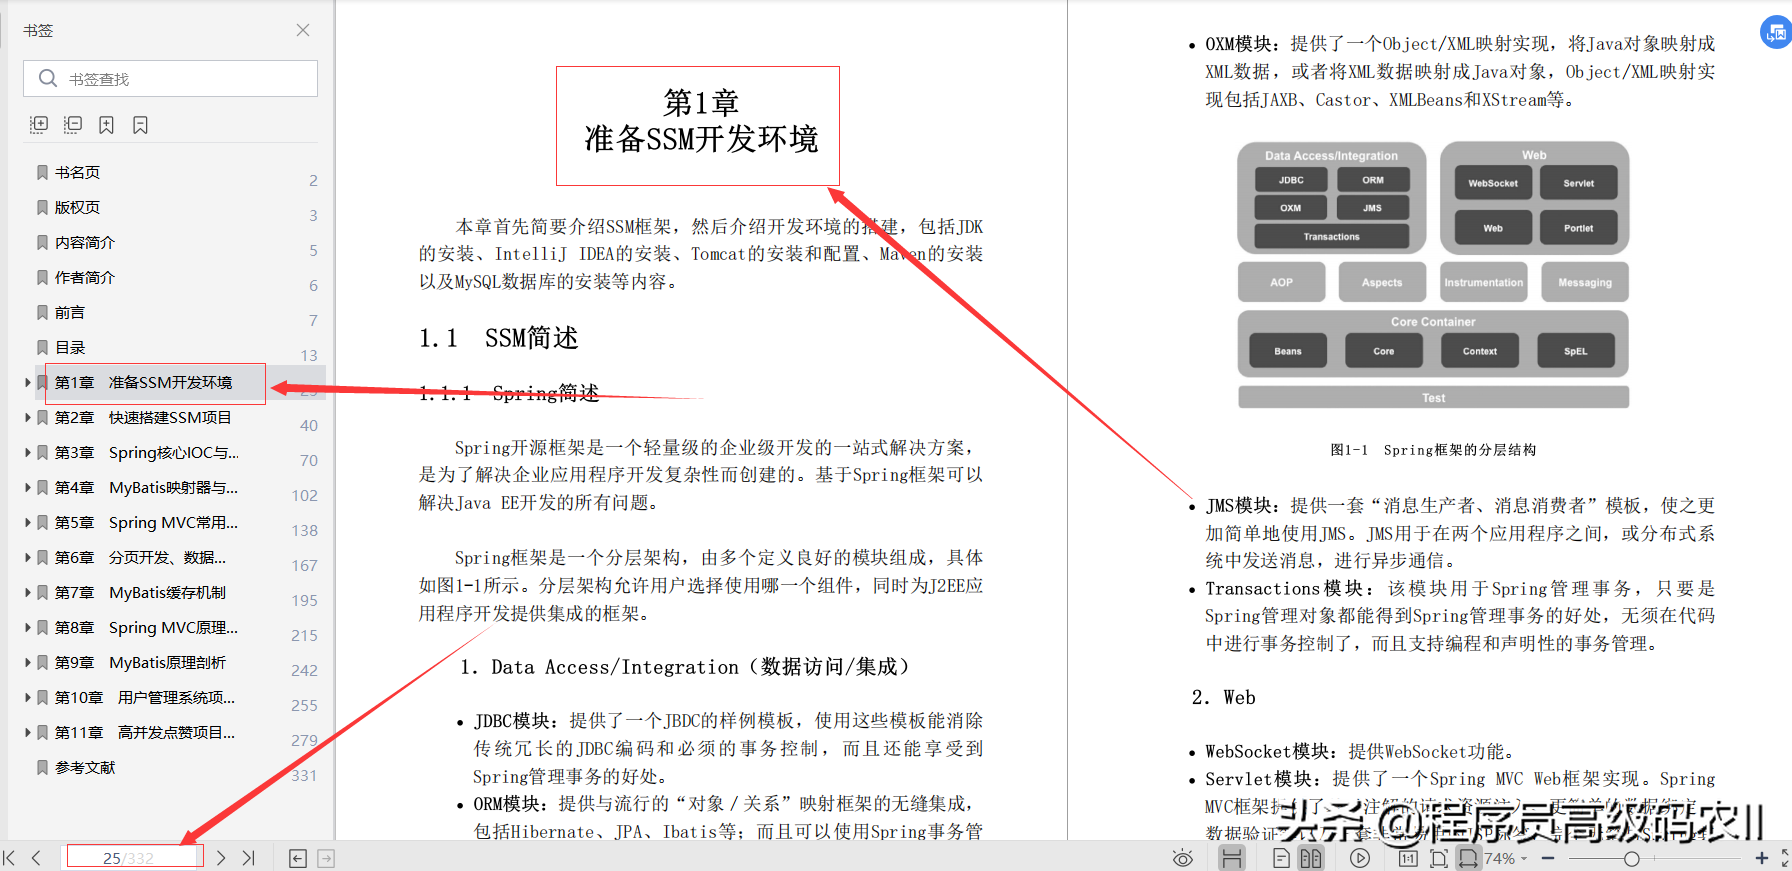 80W Meituan architects have worked hard for 7 years to form a lightweight framework SSM integration development actual document